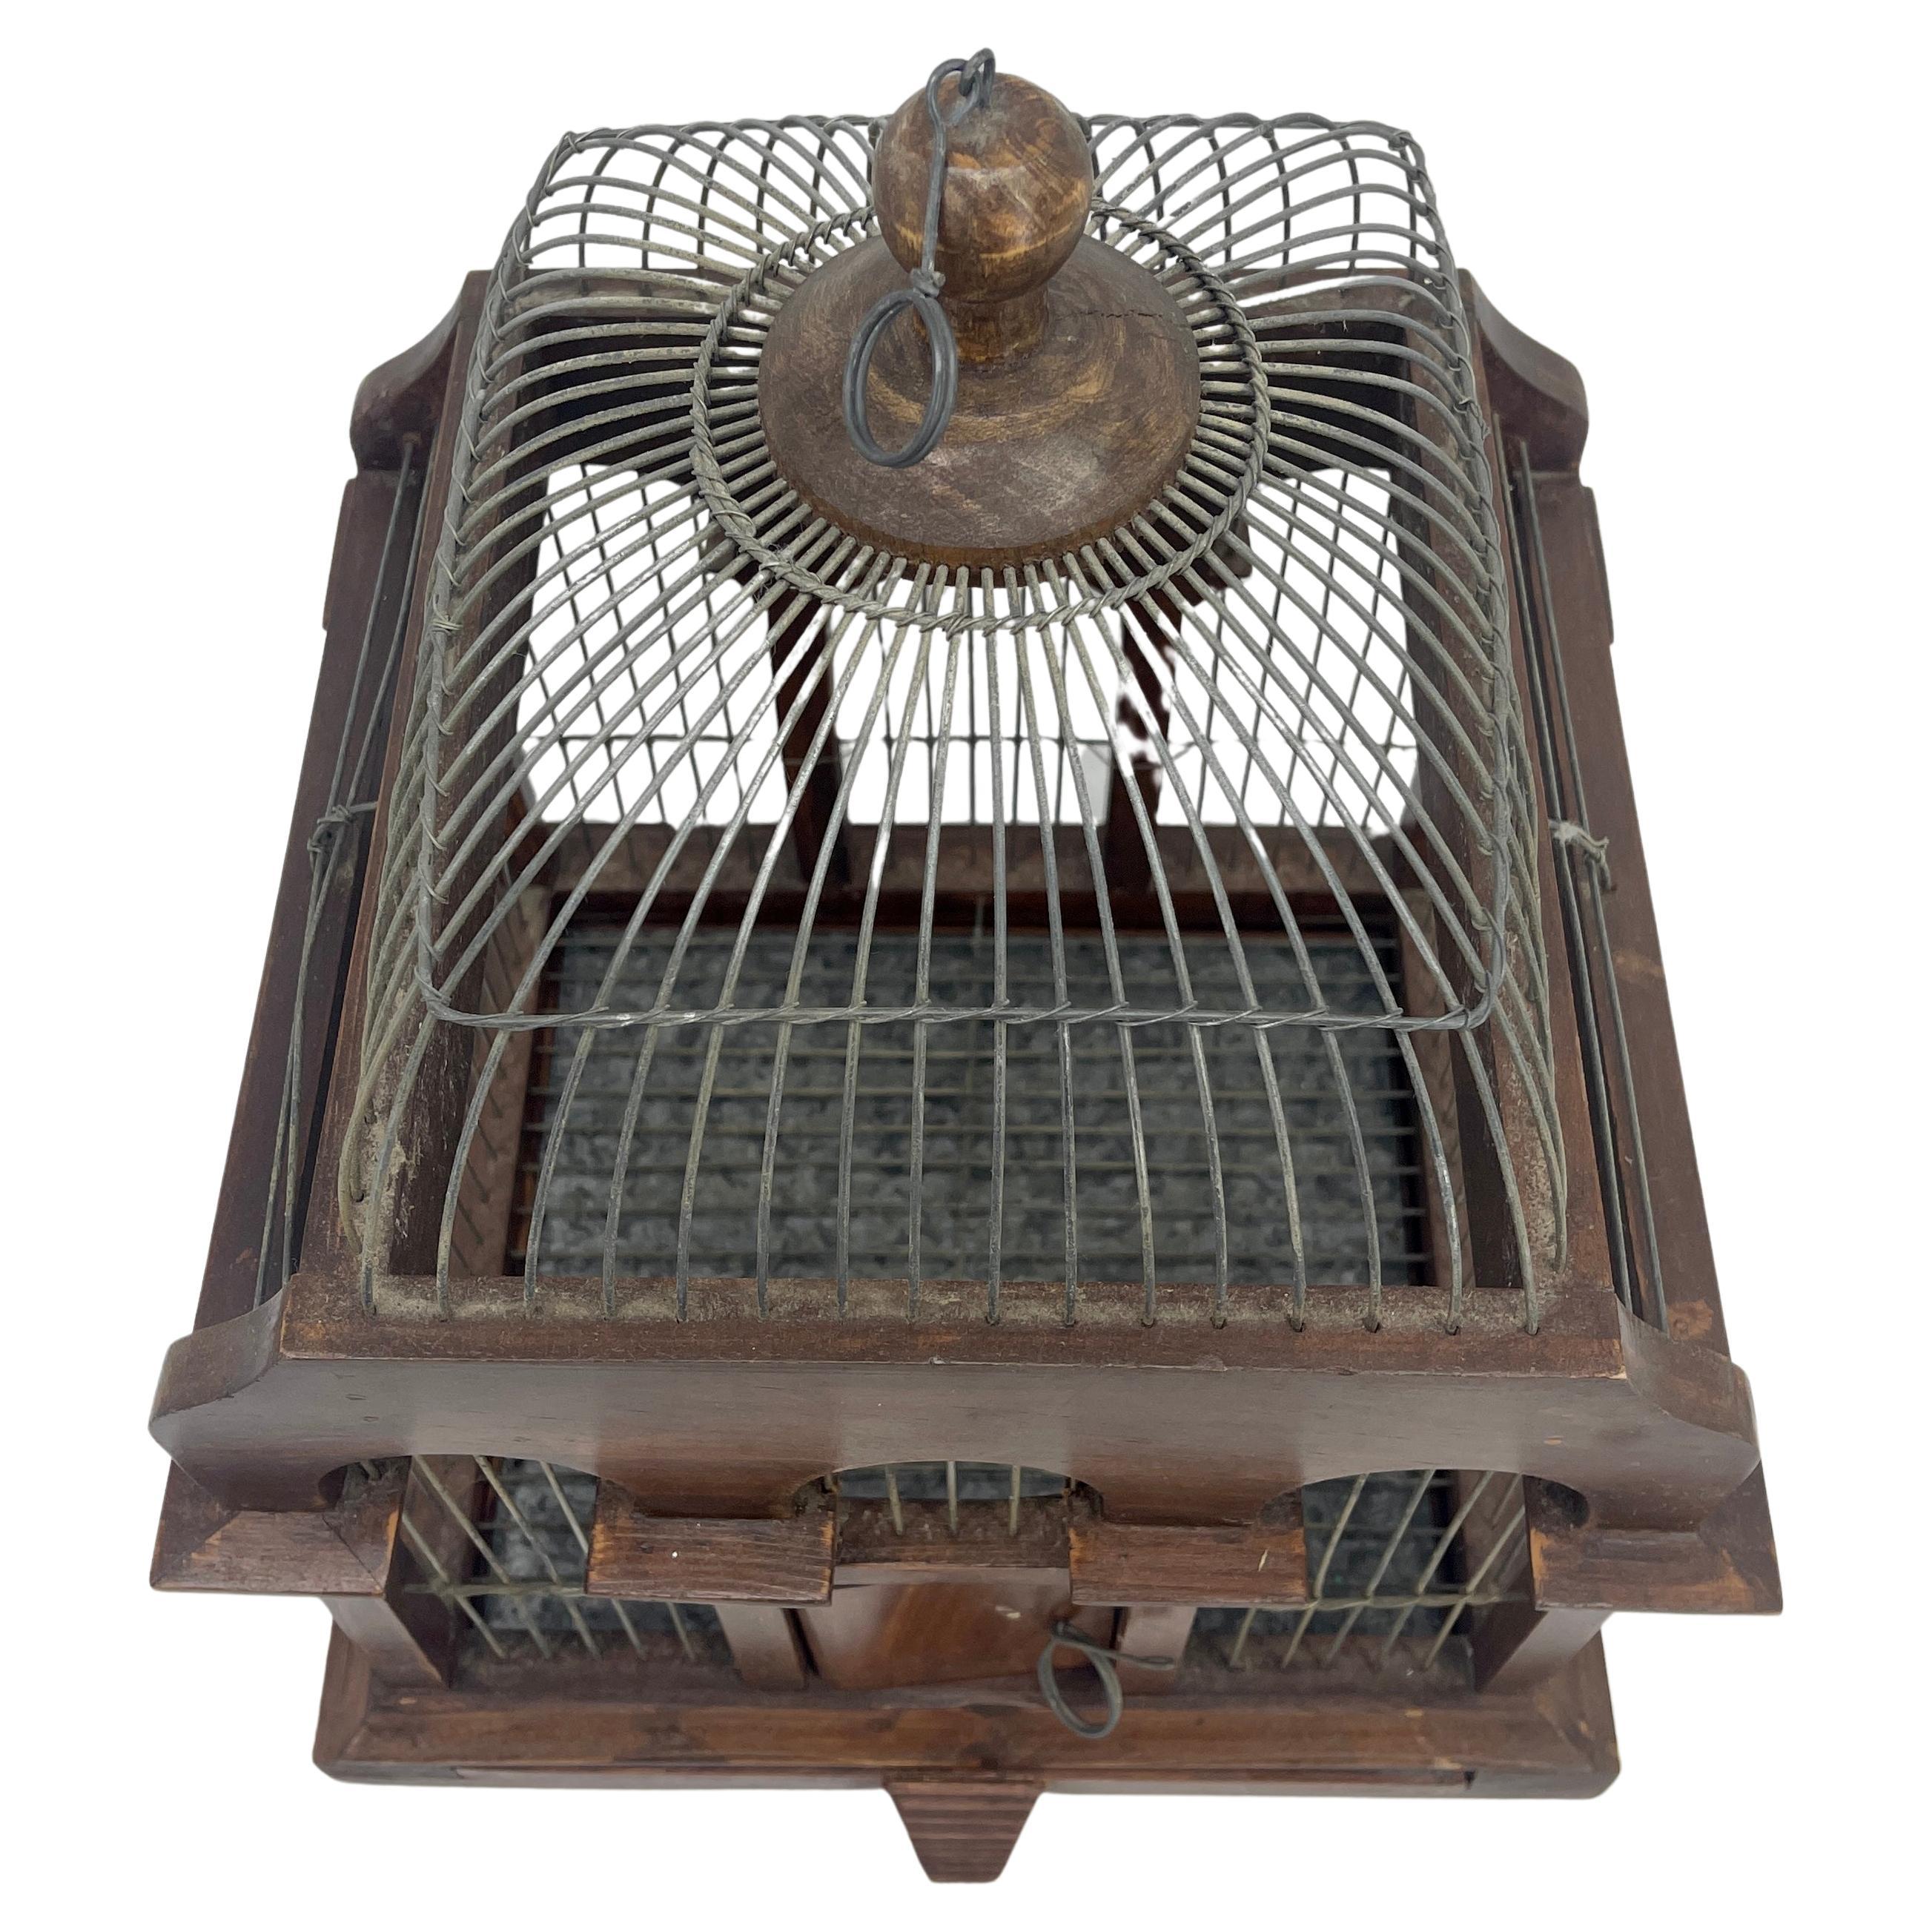 Hand-Crafted Italian Architectural Birdcage, circa 1910-1920's